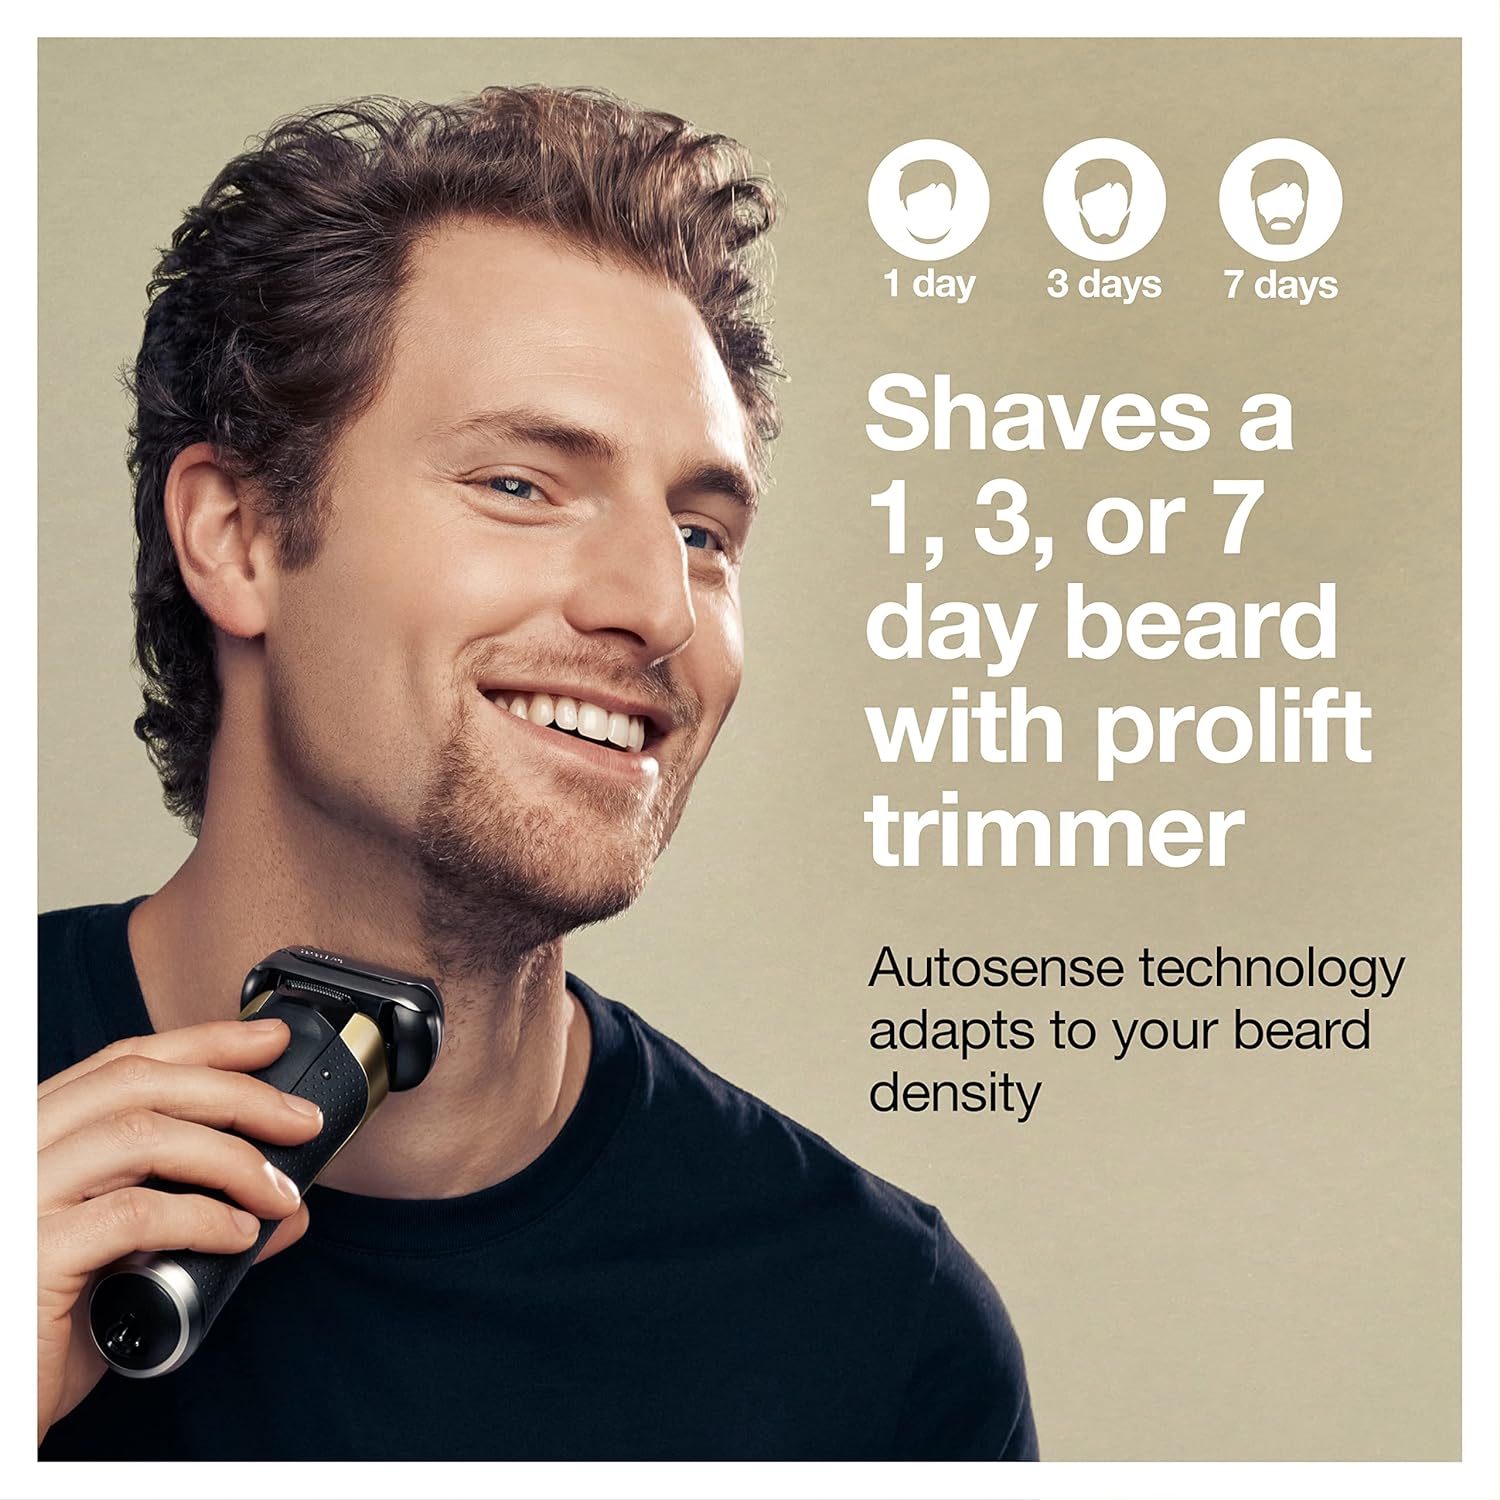 Braun Electric Razor - Experience the Ultimate Shaving with Series 9 Pro